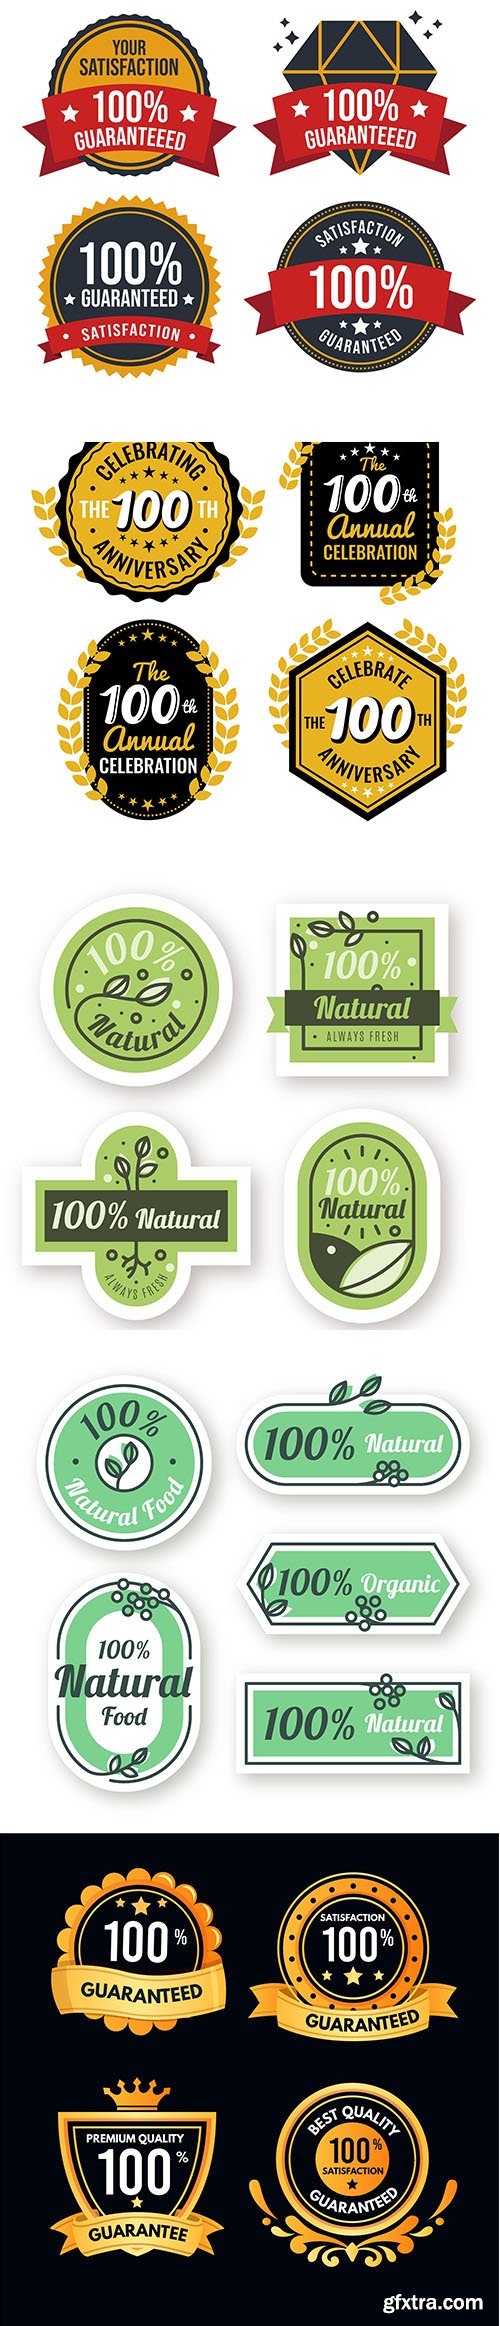 All natural badge collection